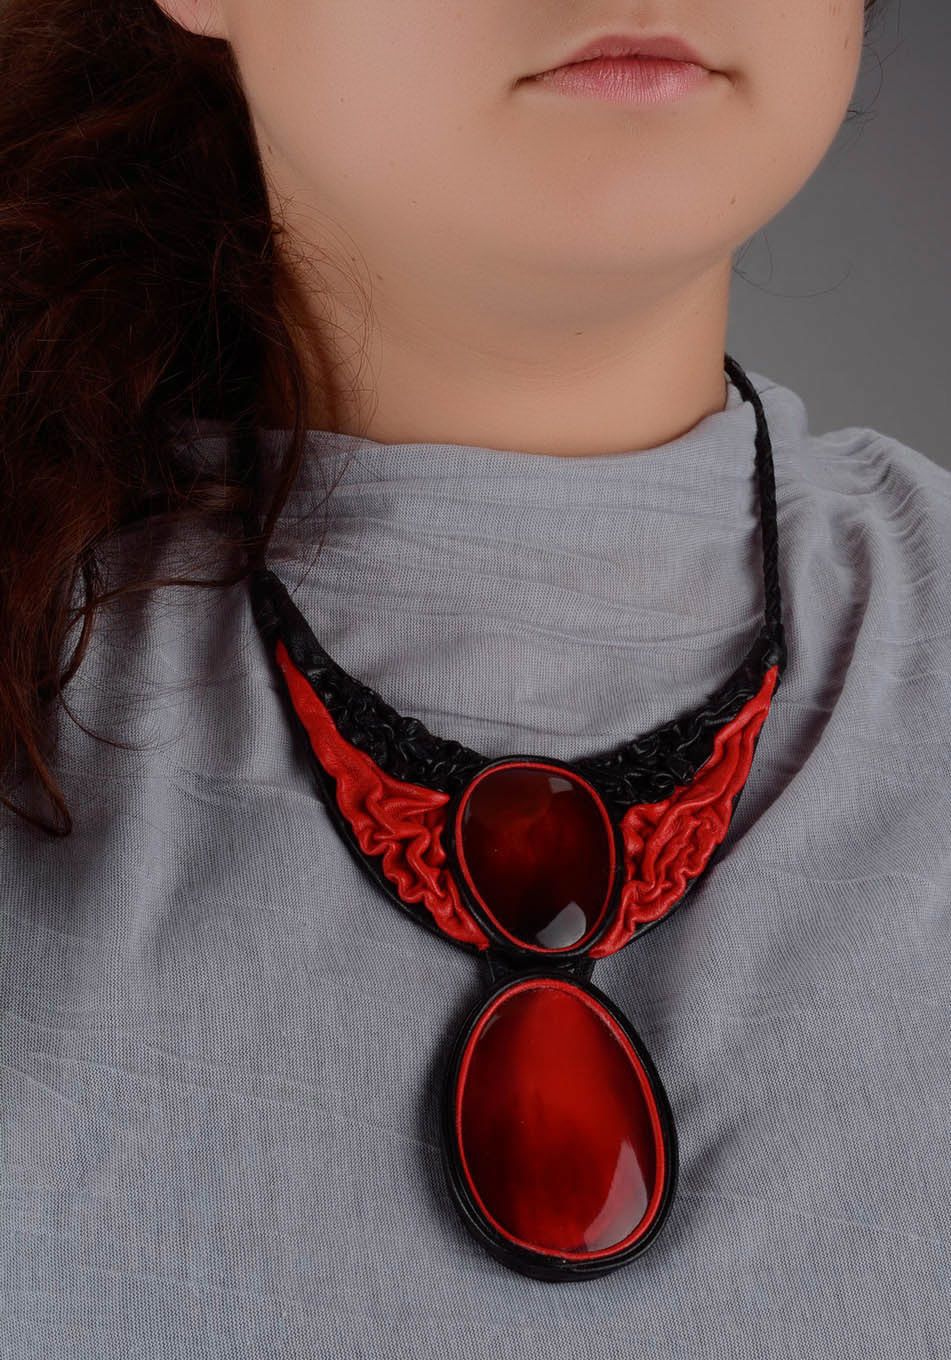 Necklace made of leather and cow horn photo 4